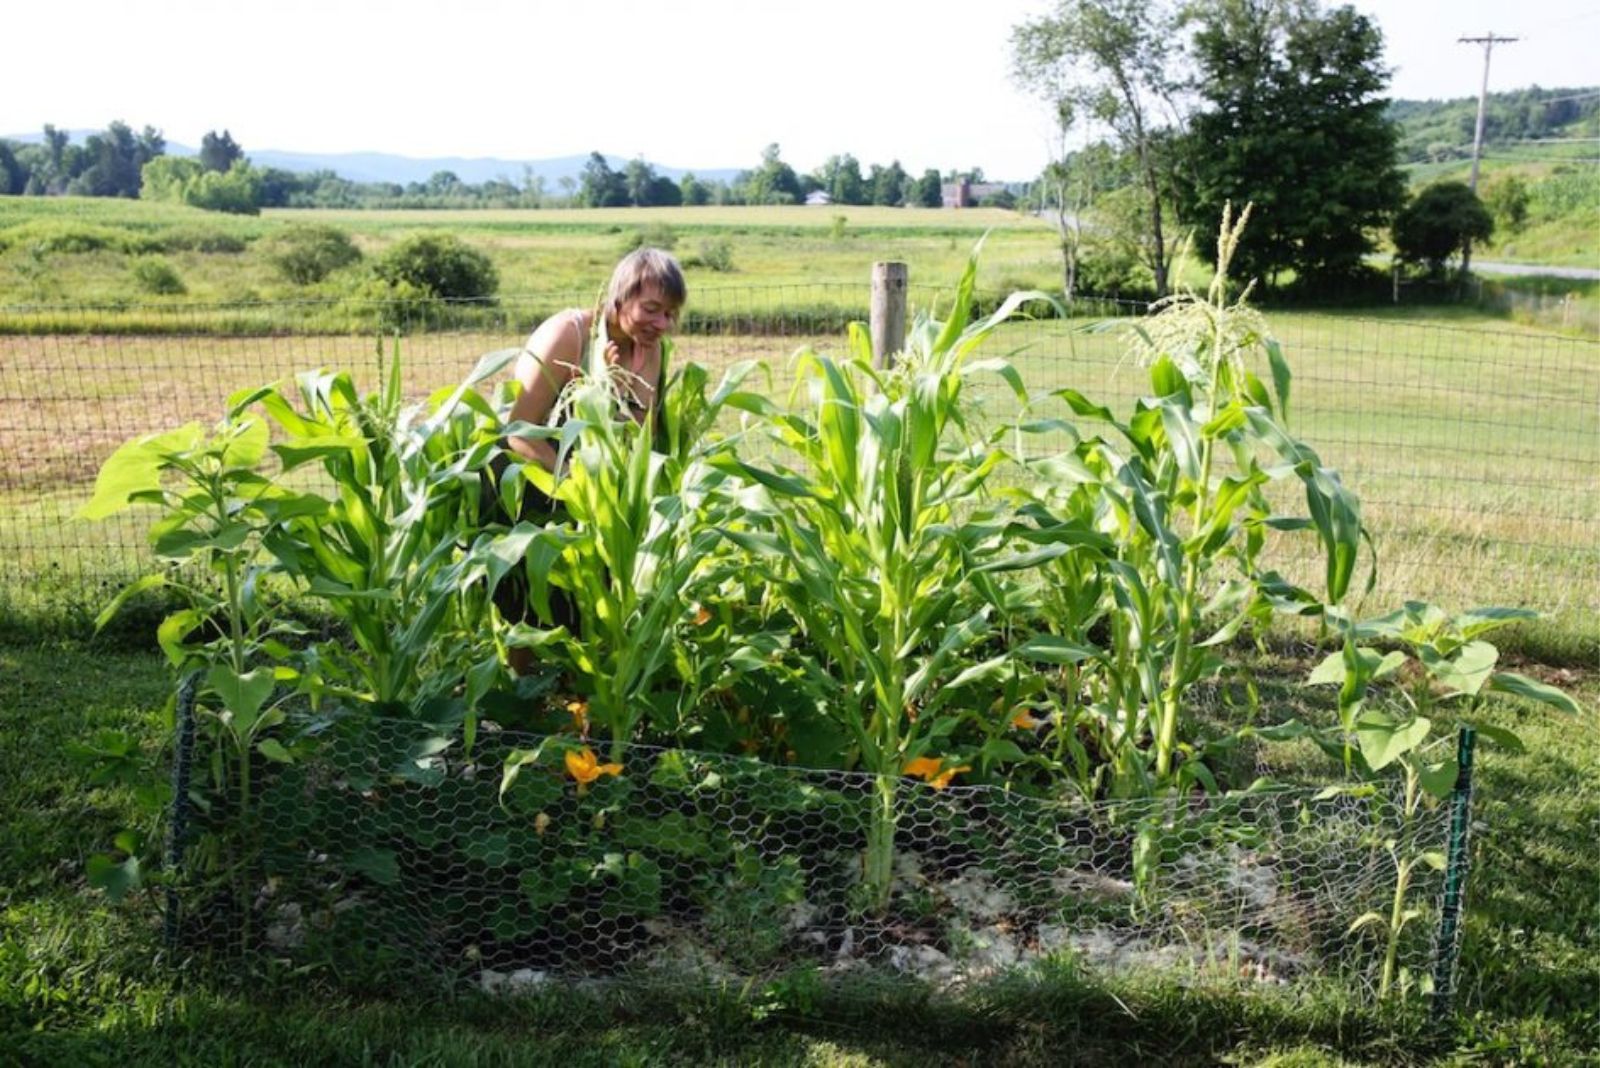 the woman plants corn and squash